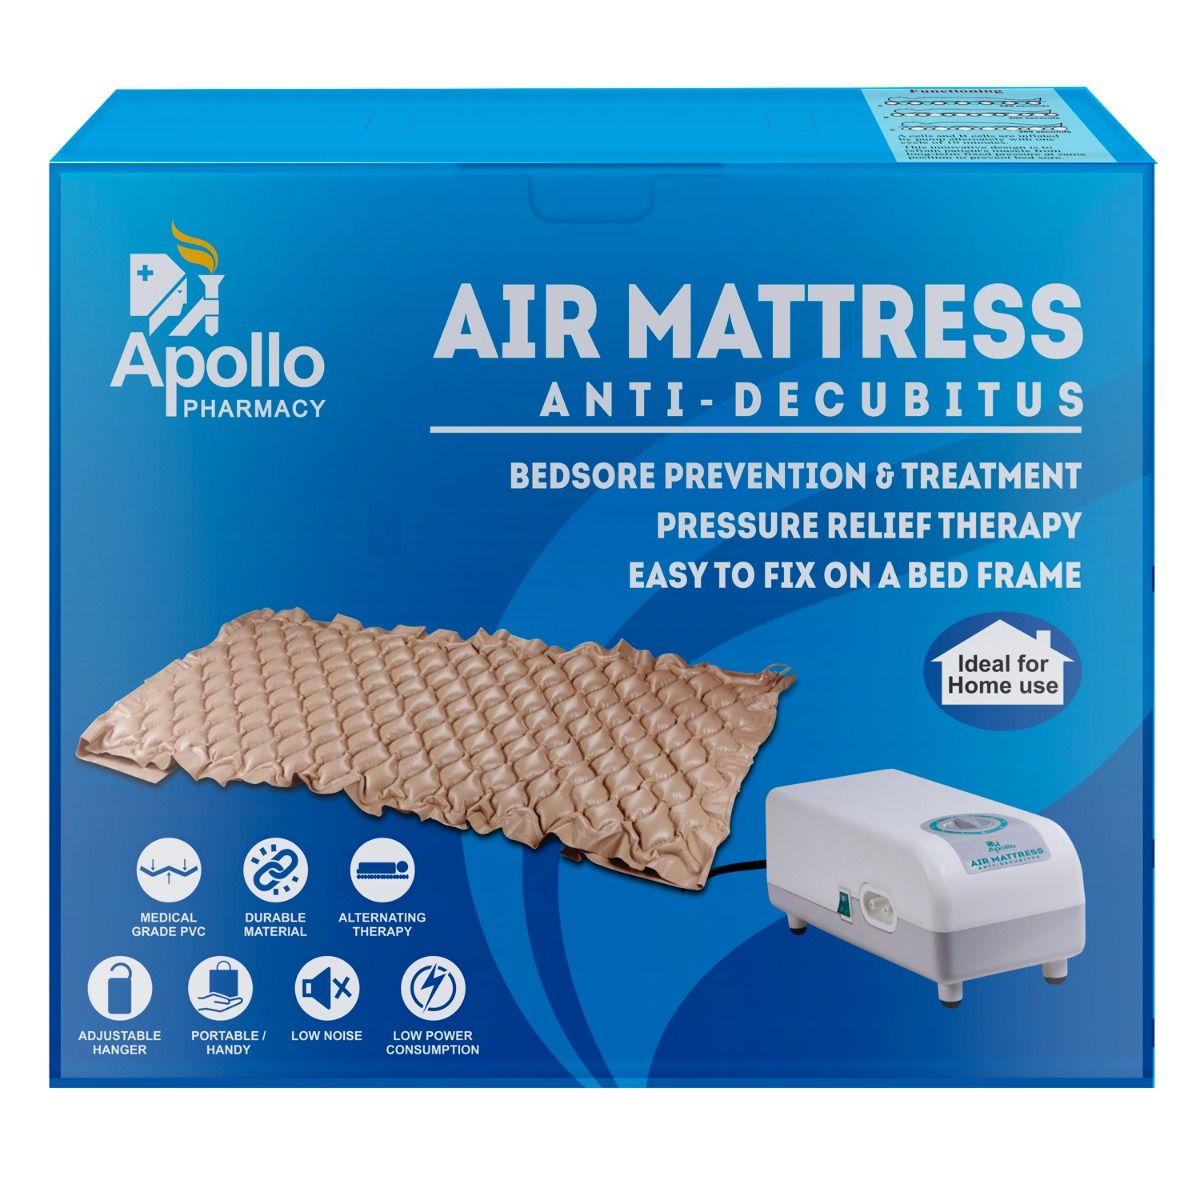 Apollo Pharmacy Air Mattress, 1 Count, Pack of 1 